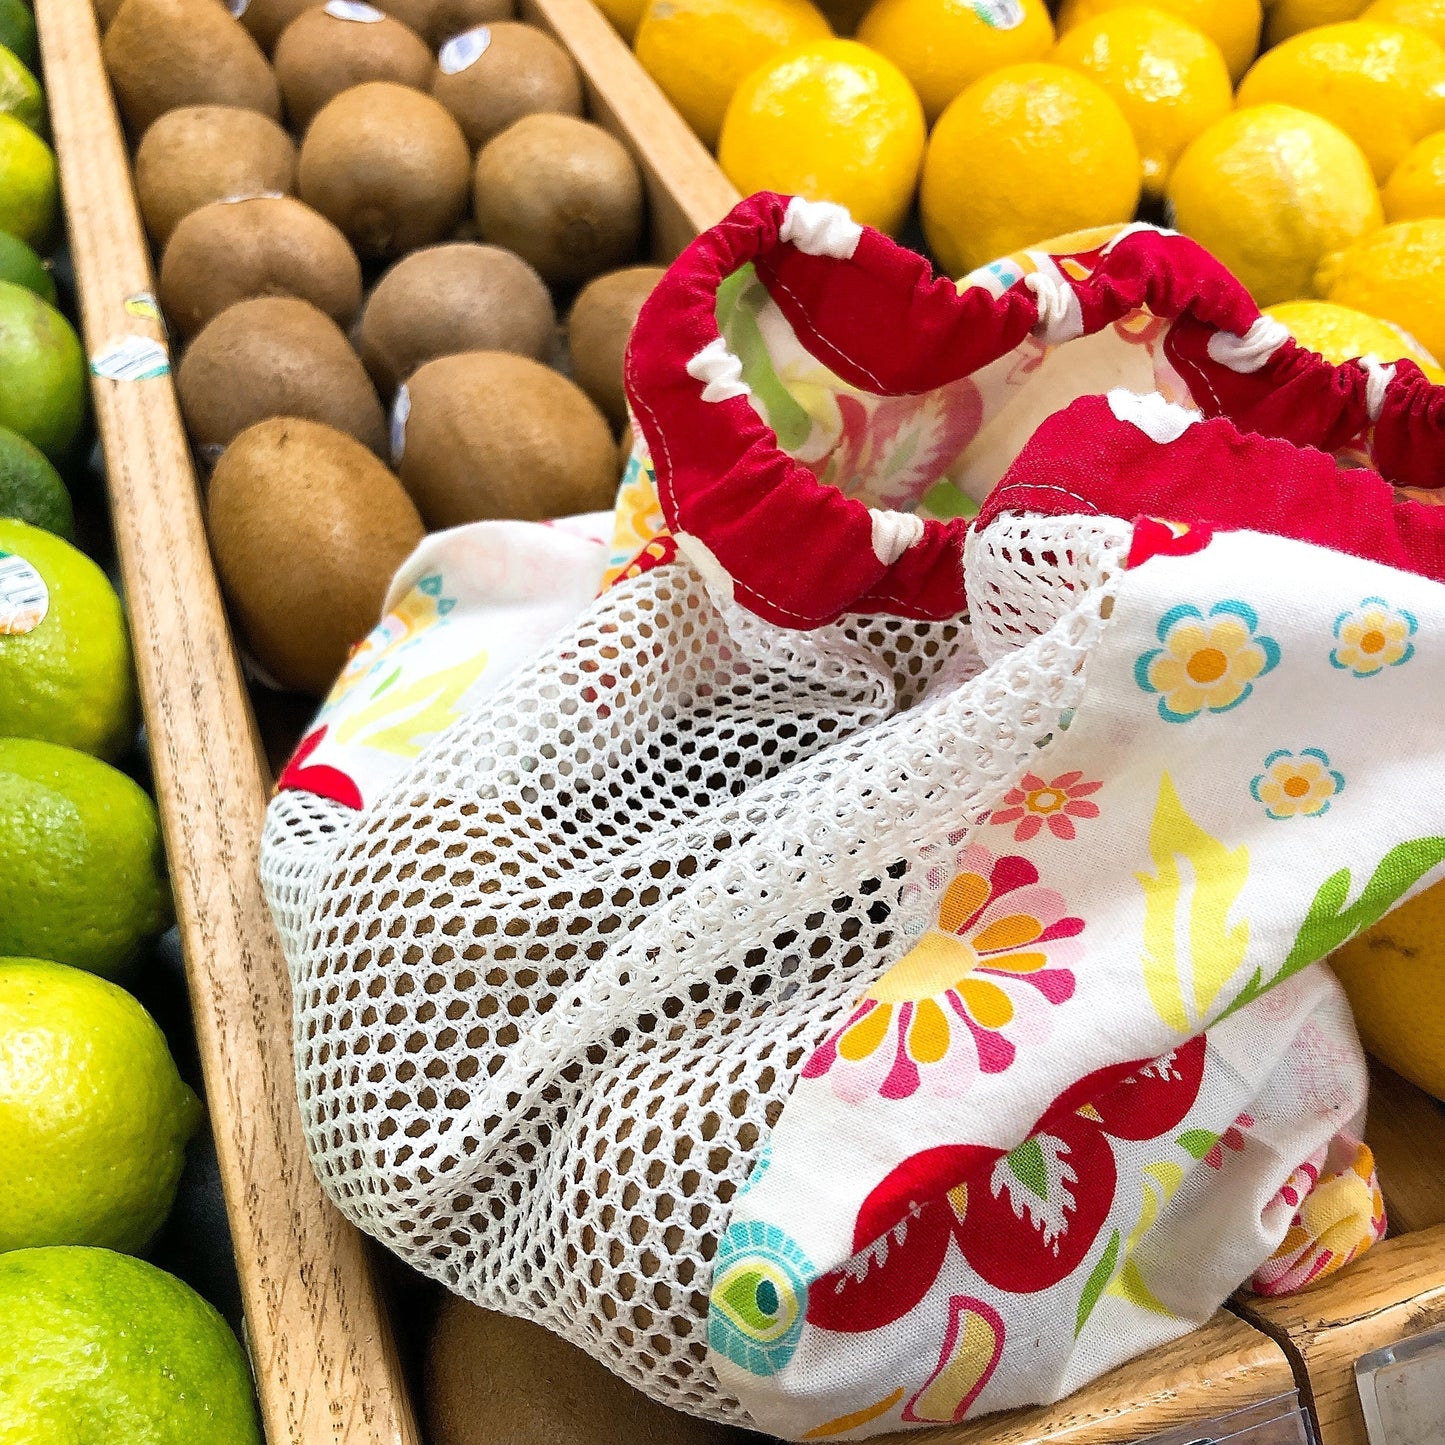 Medium Produce Bag Florals with Butterflies and Ladybugs